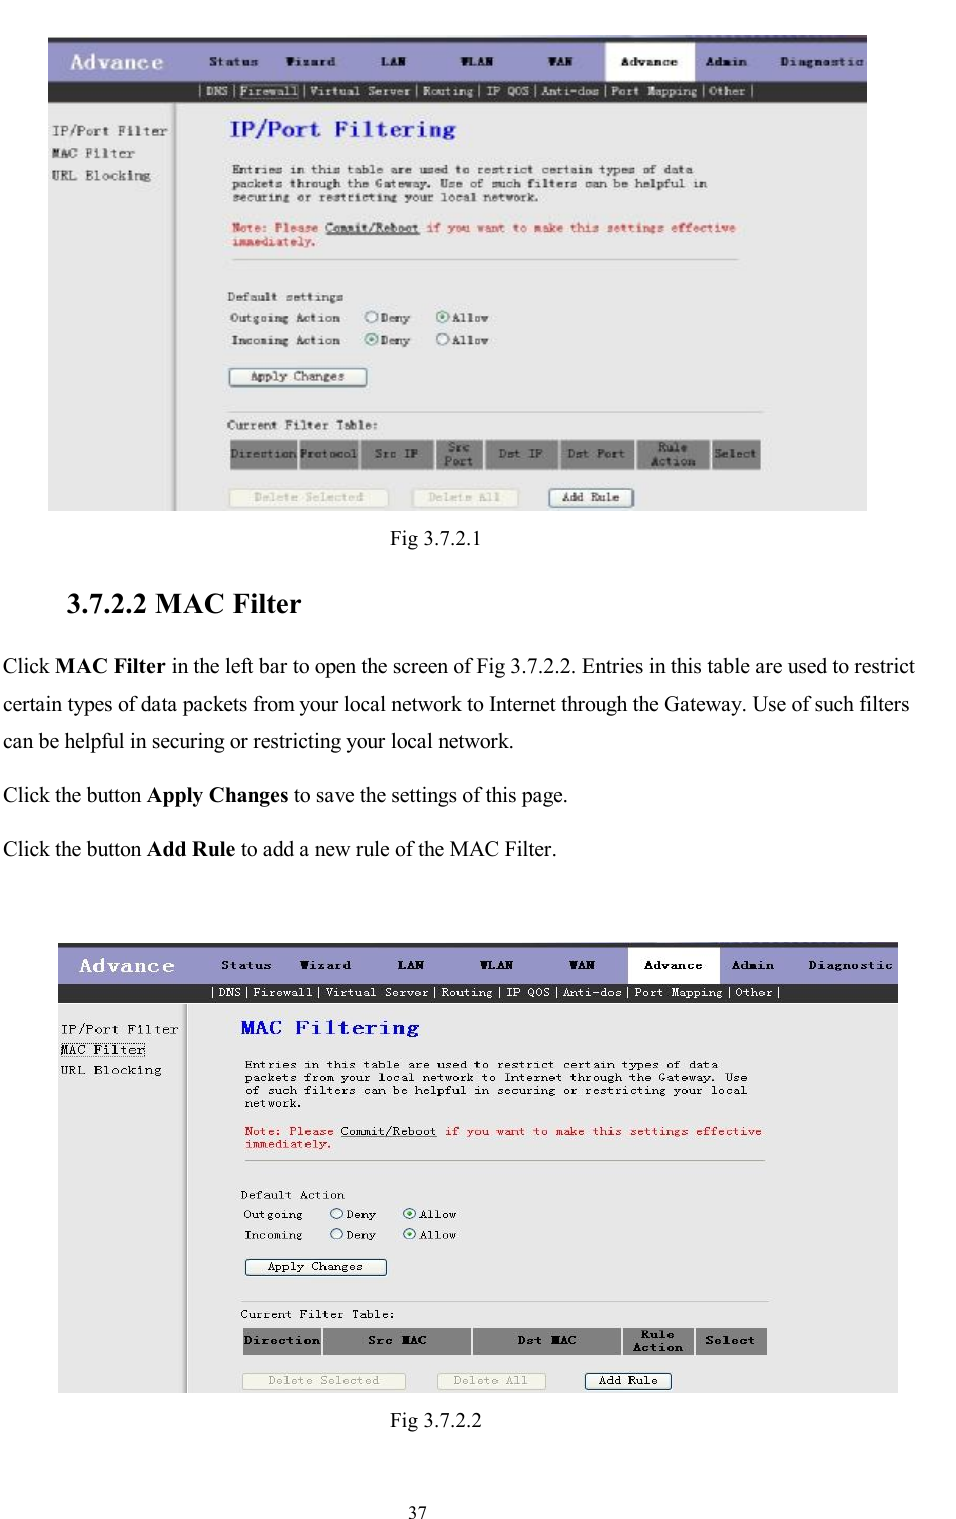                                                                     37  Fig 3.7.2.1  3.7.2.2 MAC Filter Click MAC Filter in the left bar to open the screen of Fig 3.7.2.2. Entries in this table are used to restrict certain types of data packets from your local network to Internet through the Gateway. Use of such filters can be helpful in securing or restricting your local network. Click the button Apply Changes to save the settings of this page. Click the button Add Rule to add a new rule of the MAC Filter.   Fig 3.7.2.2    